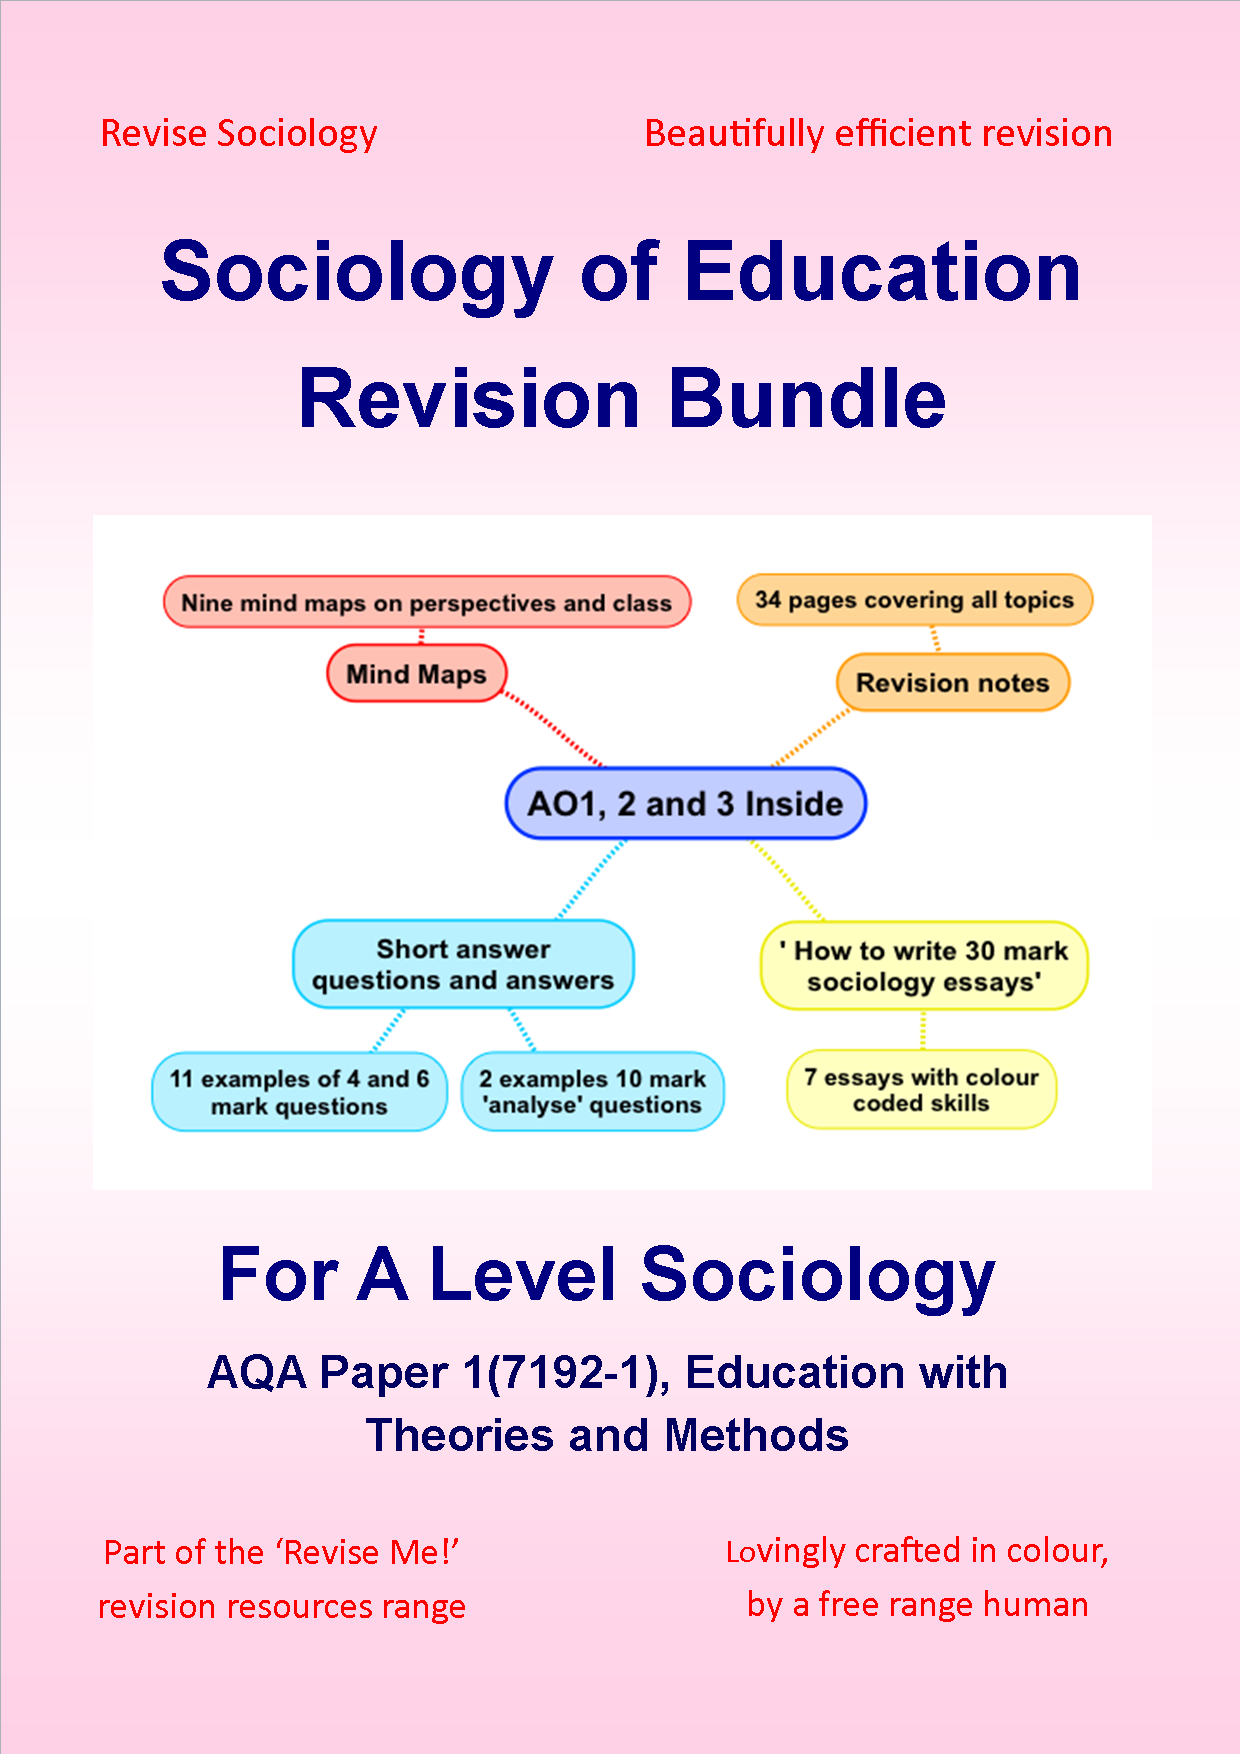 how does social class affect education essay